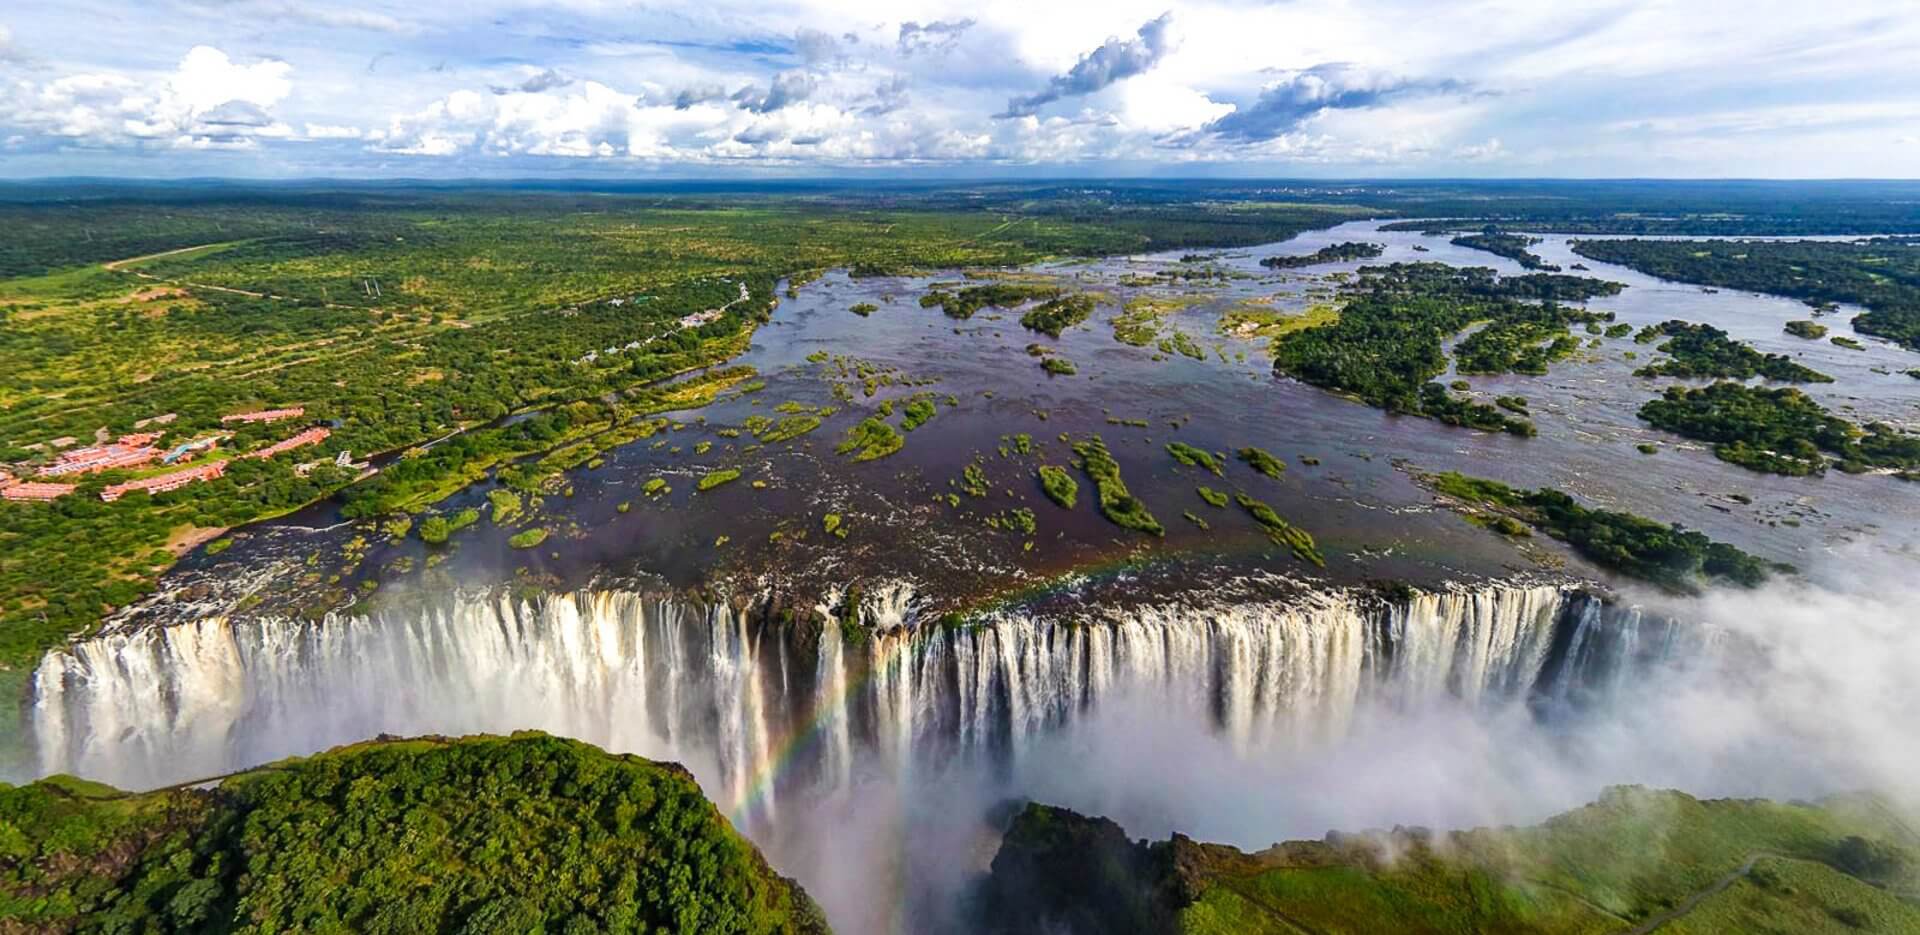 Accessing the Victoria Falls from the Zambia side